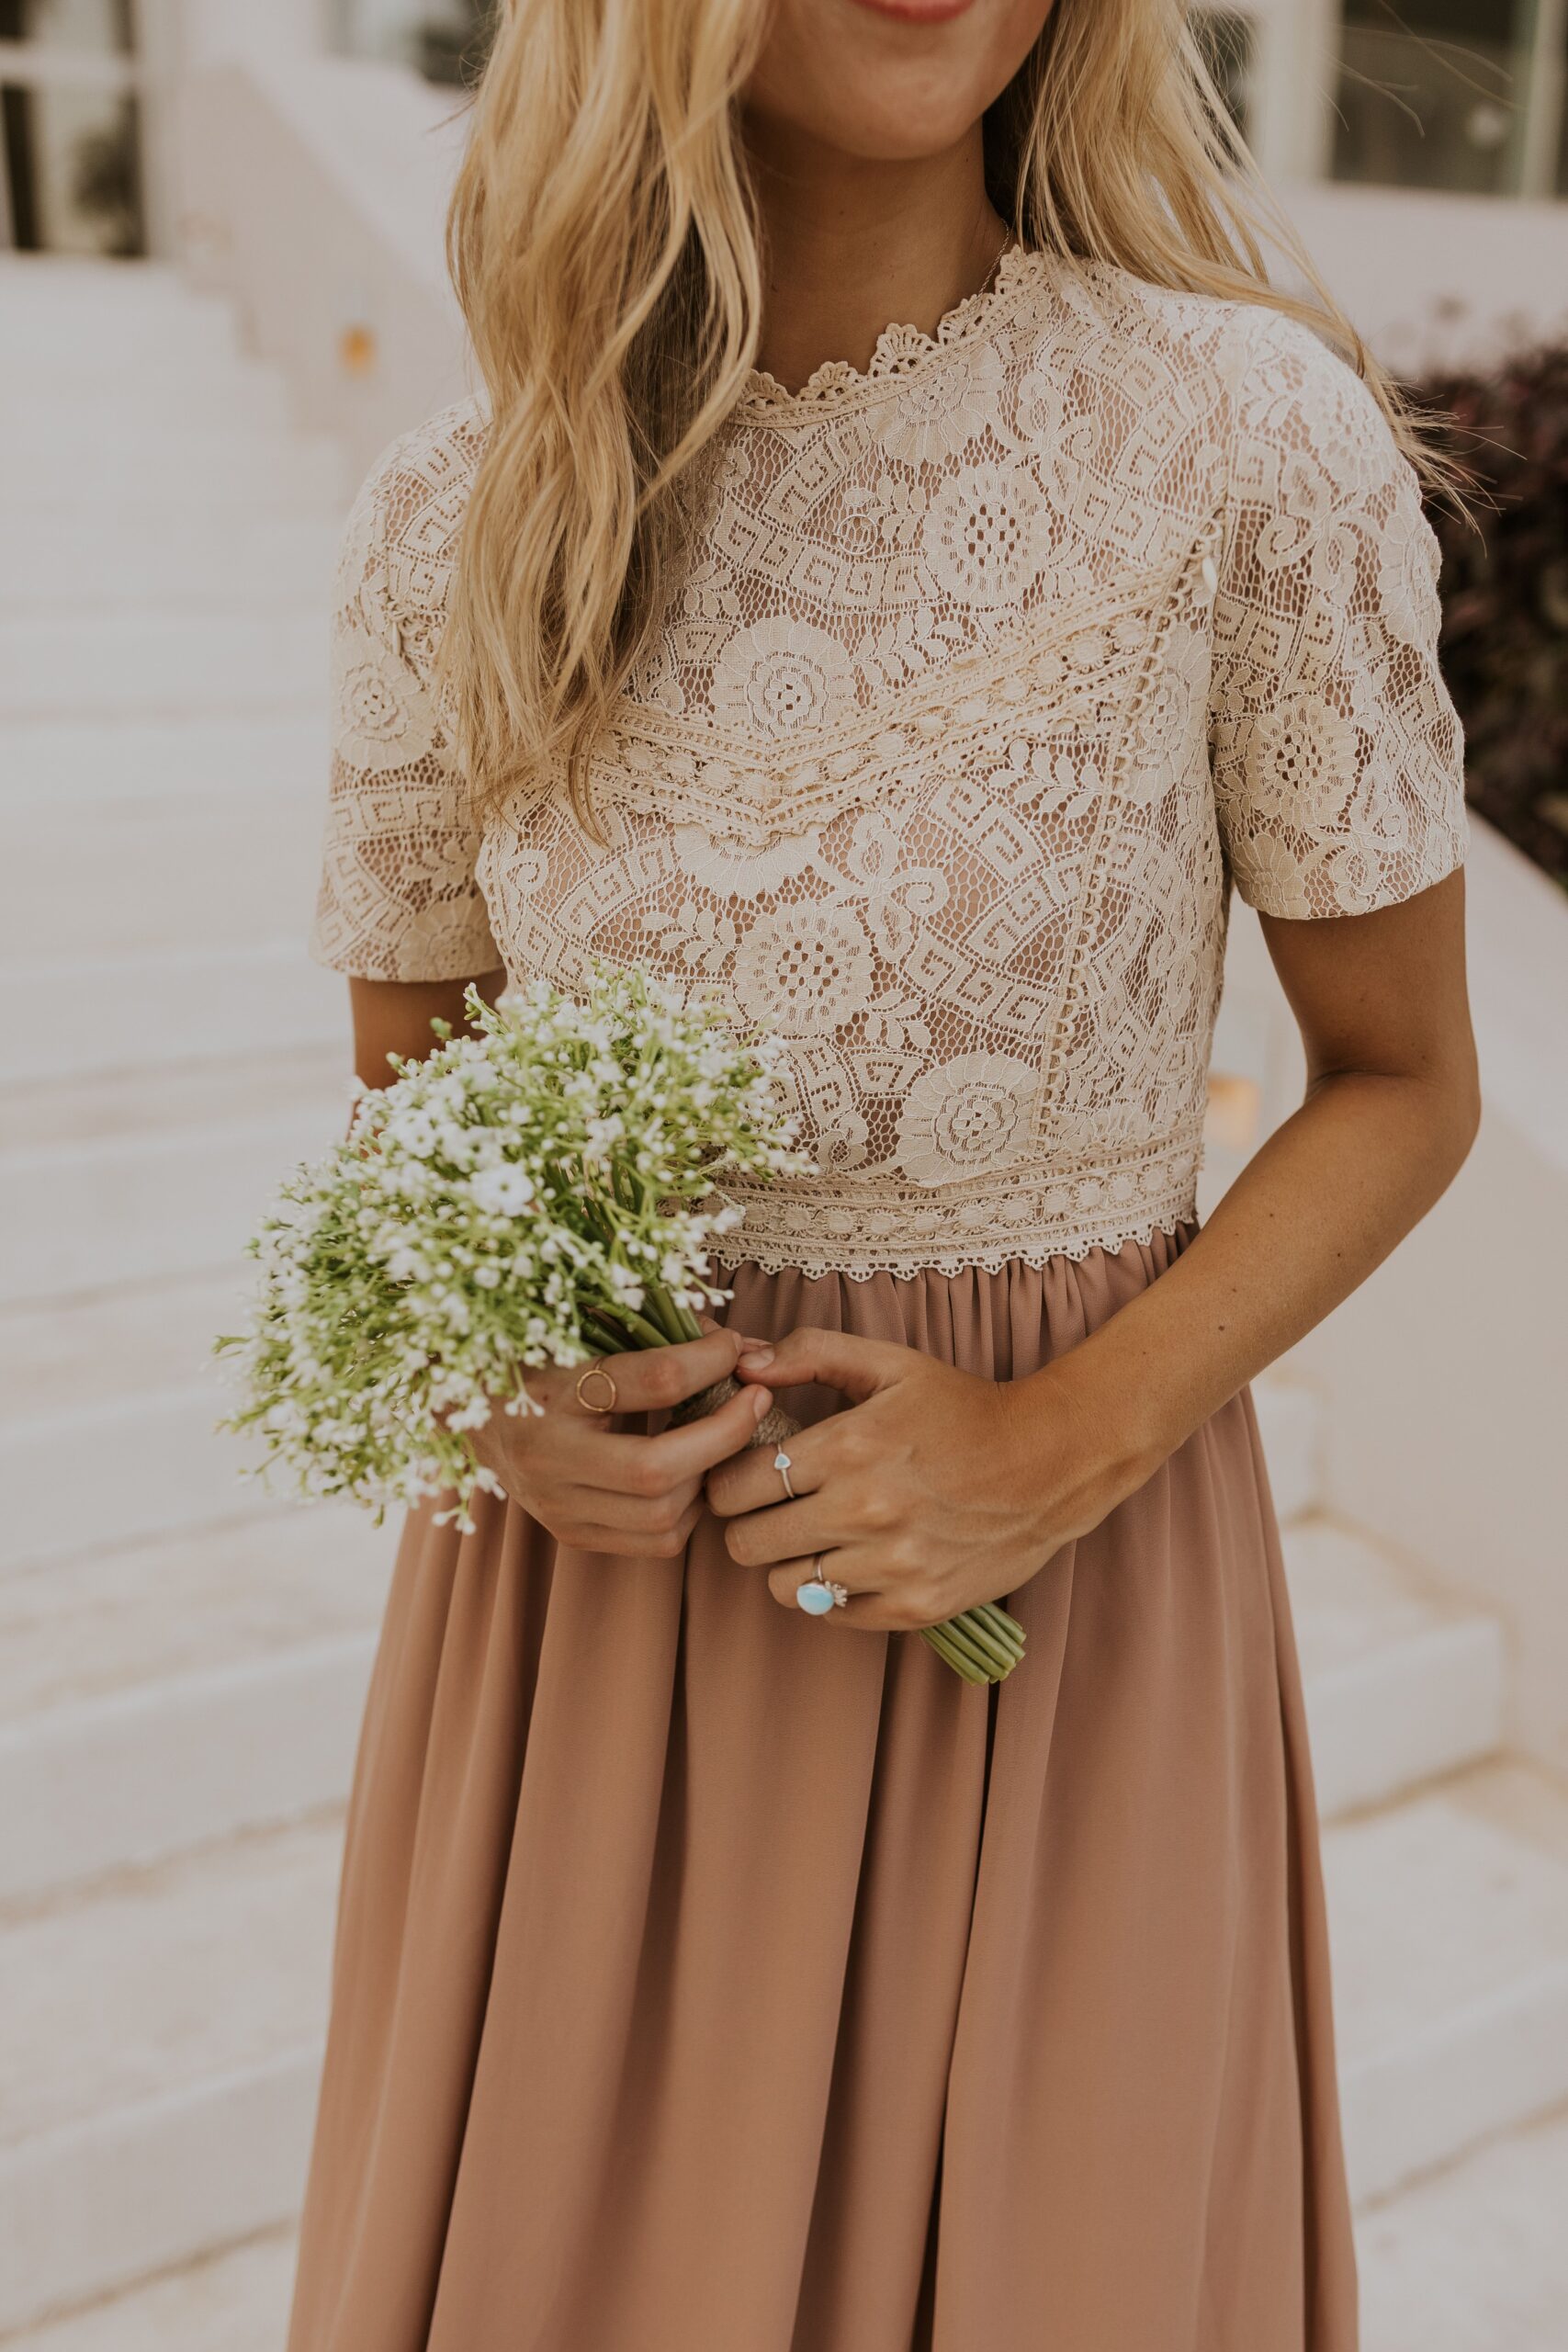 Lace Dress: Effortless Elegance and Romance in Every Stitch